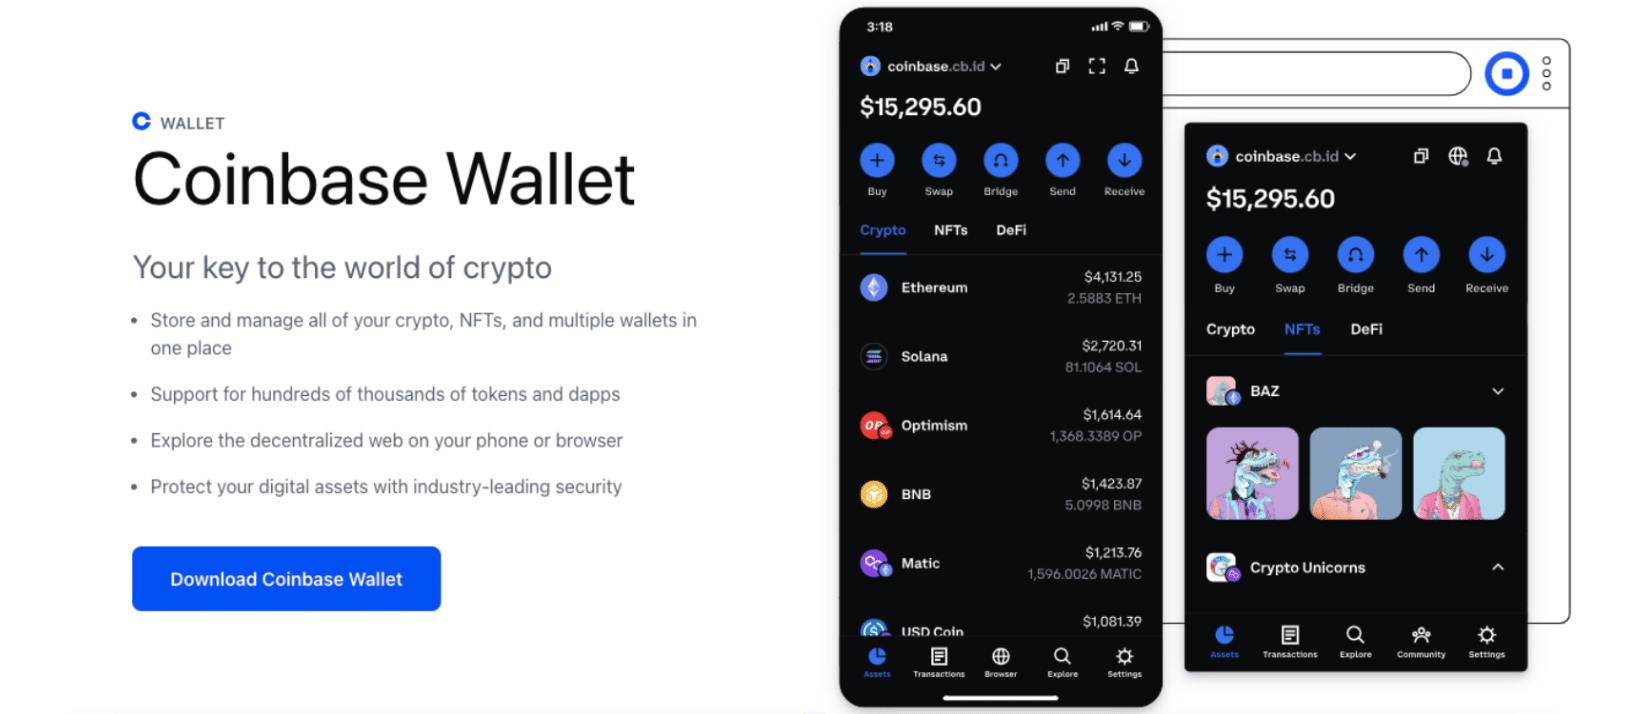 In terms of compatibility, Coinbase wallet supports a wide variety of cryptocurrencies, making it a versatile tool for managing a diverse portfolio.